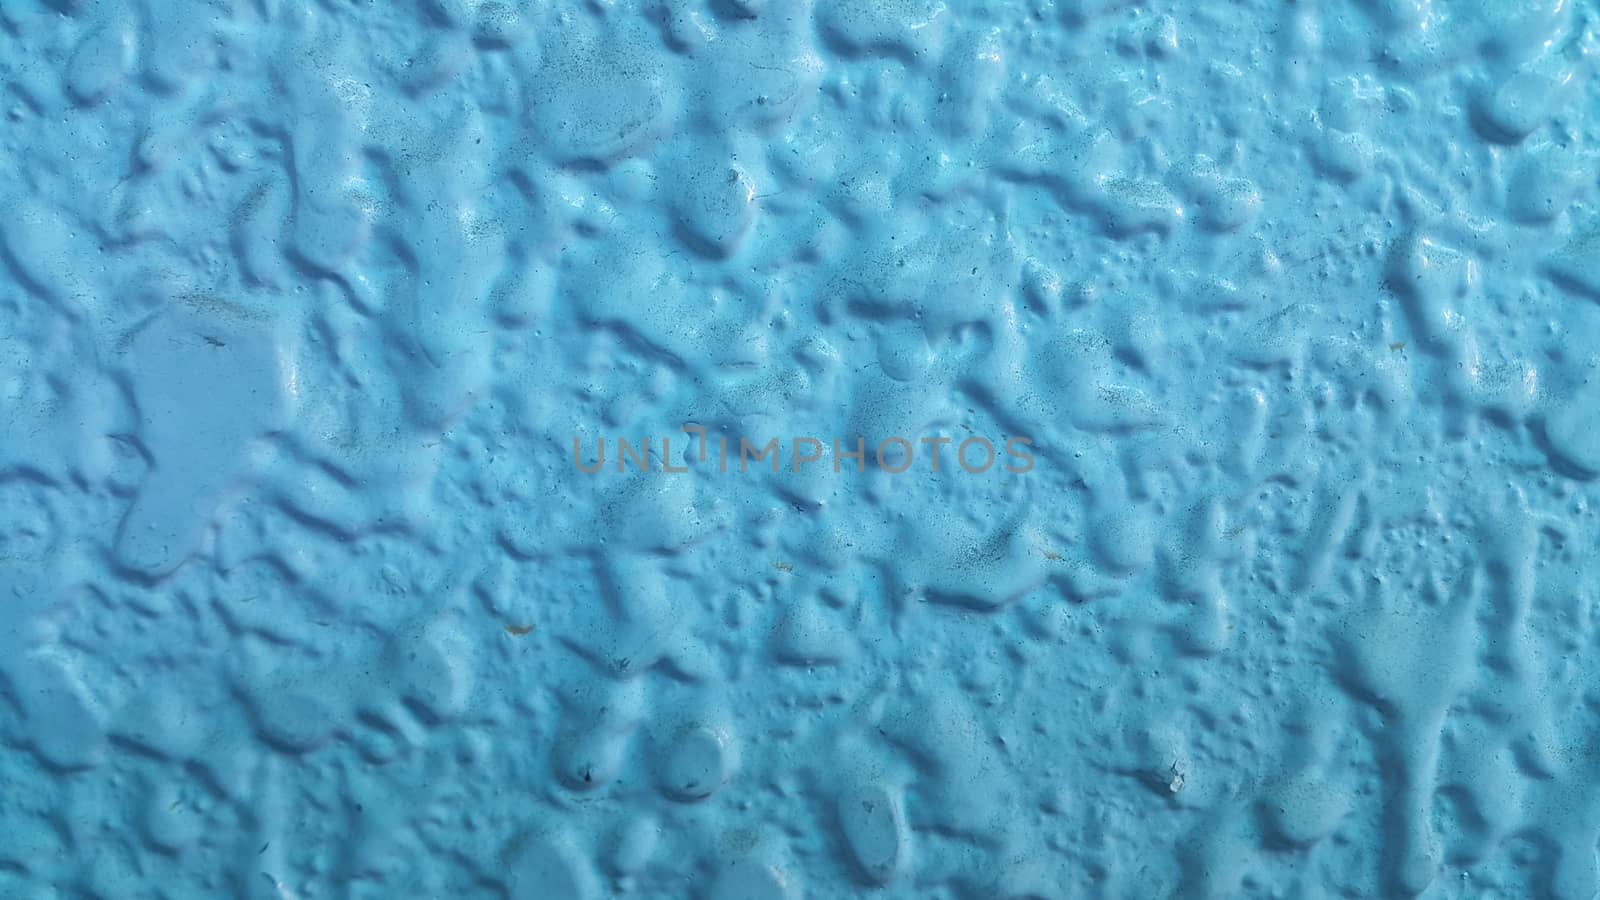 Bluish cement floor for texture and background abstract
 by Photochowk